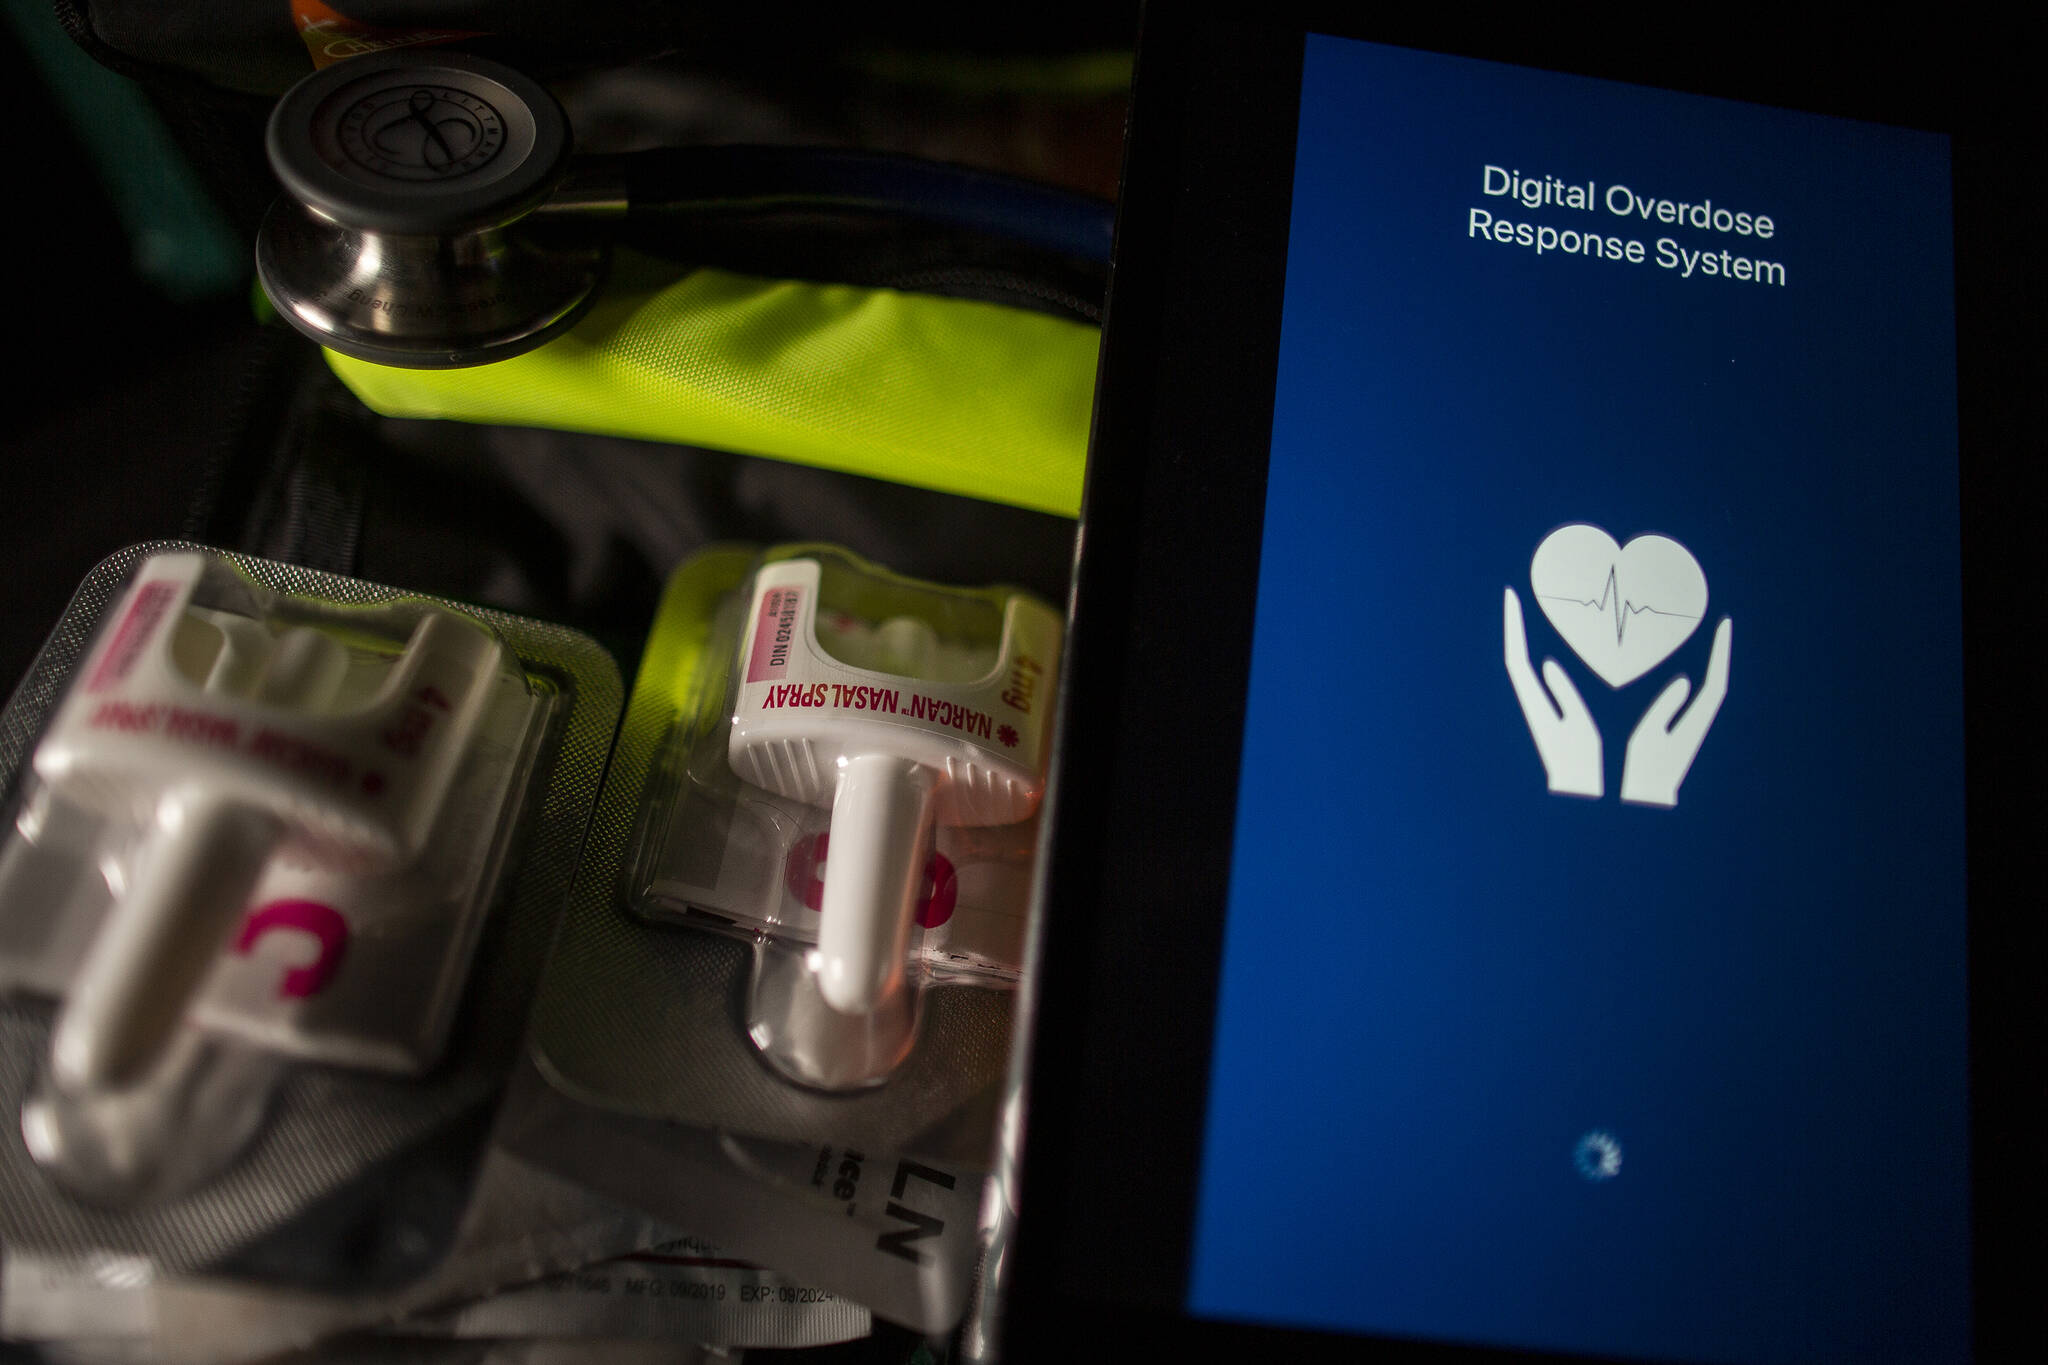 A handheld device showing the loading screen for the Alberta Digital Overdose Response System mobile application is shown alongside a pair of Narcan nasal injectors in a photo illustration in Toronto, Monday, Dec. 6, 2021. THE CANADIAN PRESS/Giordano Ciampini